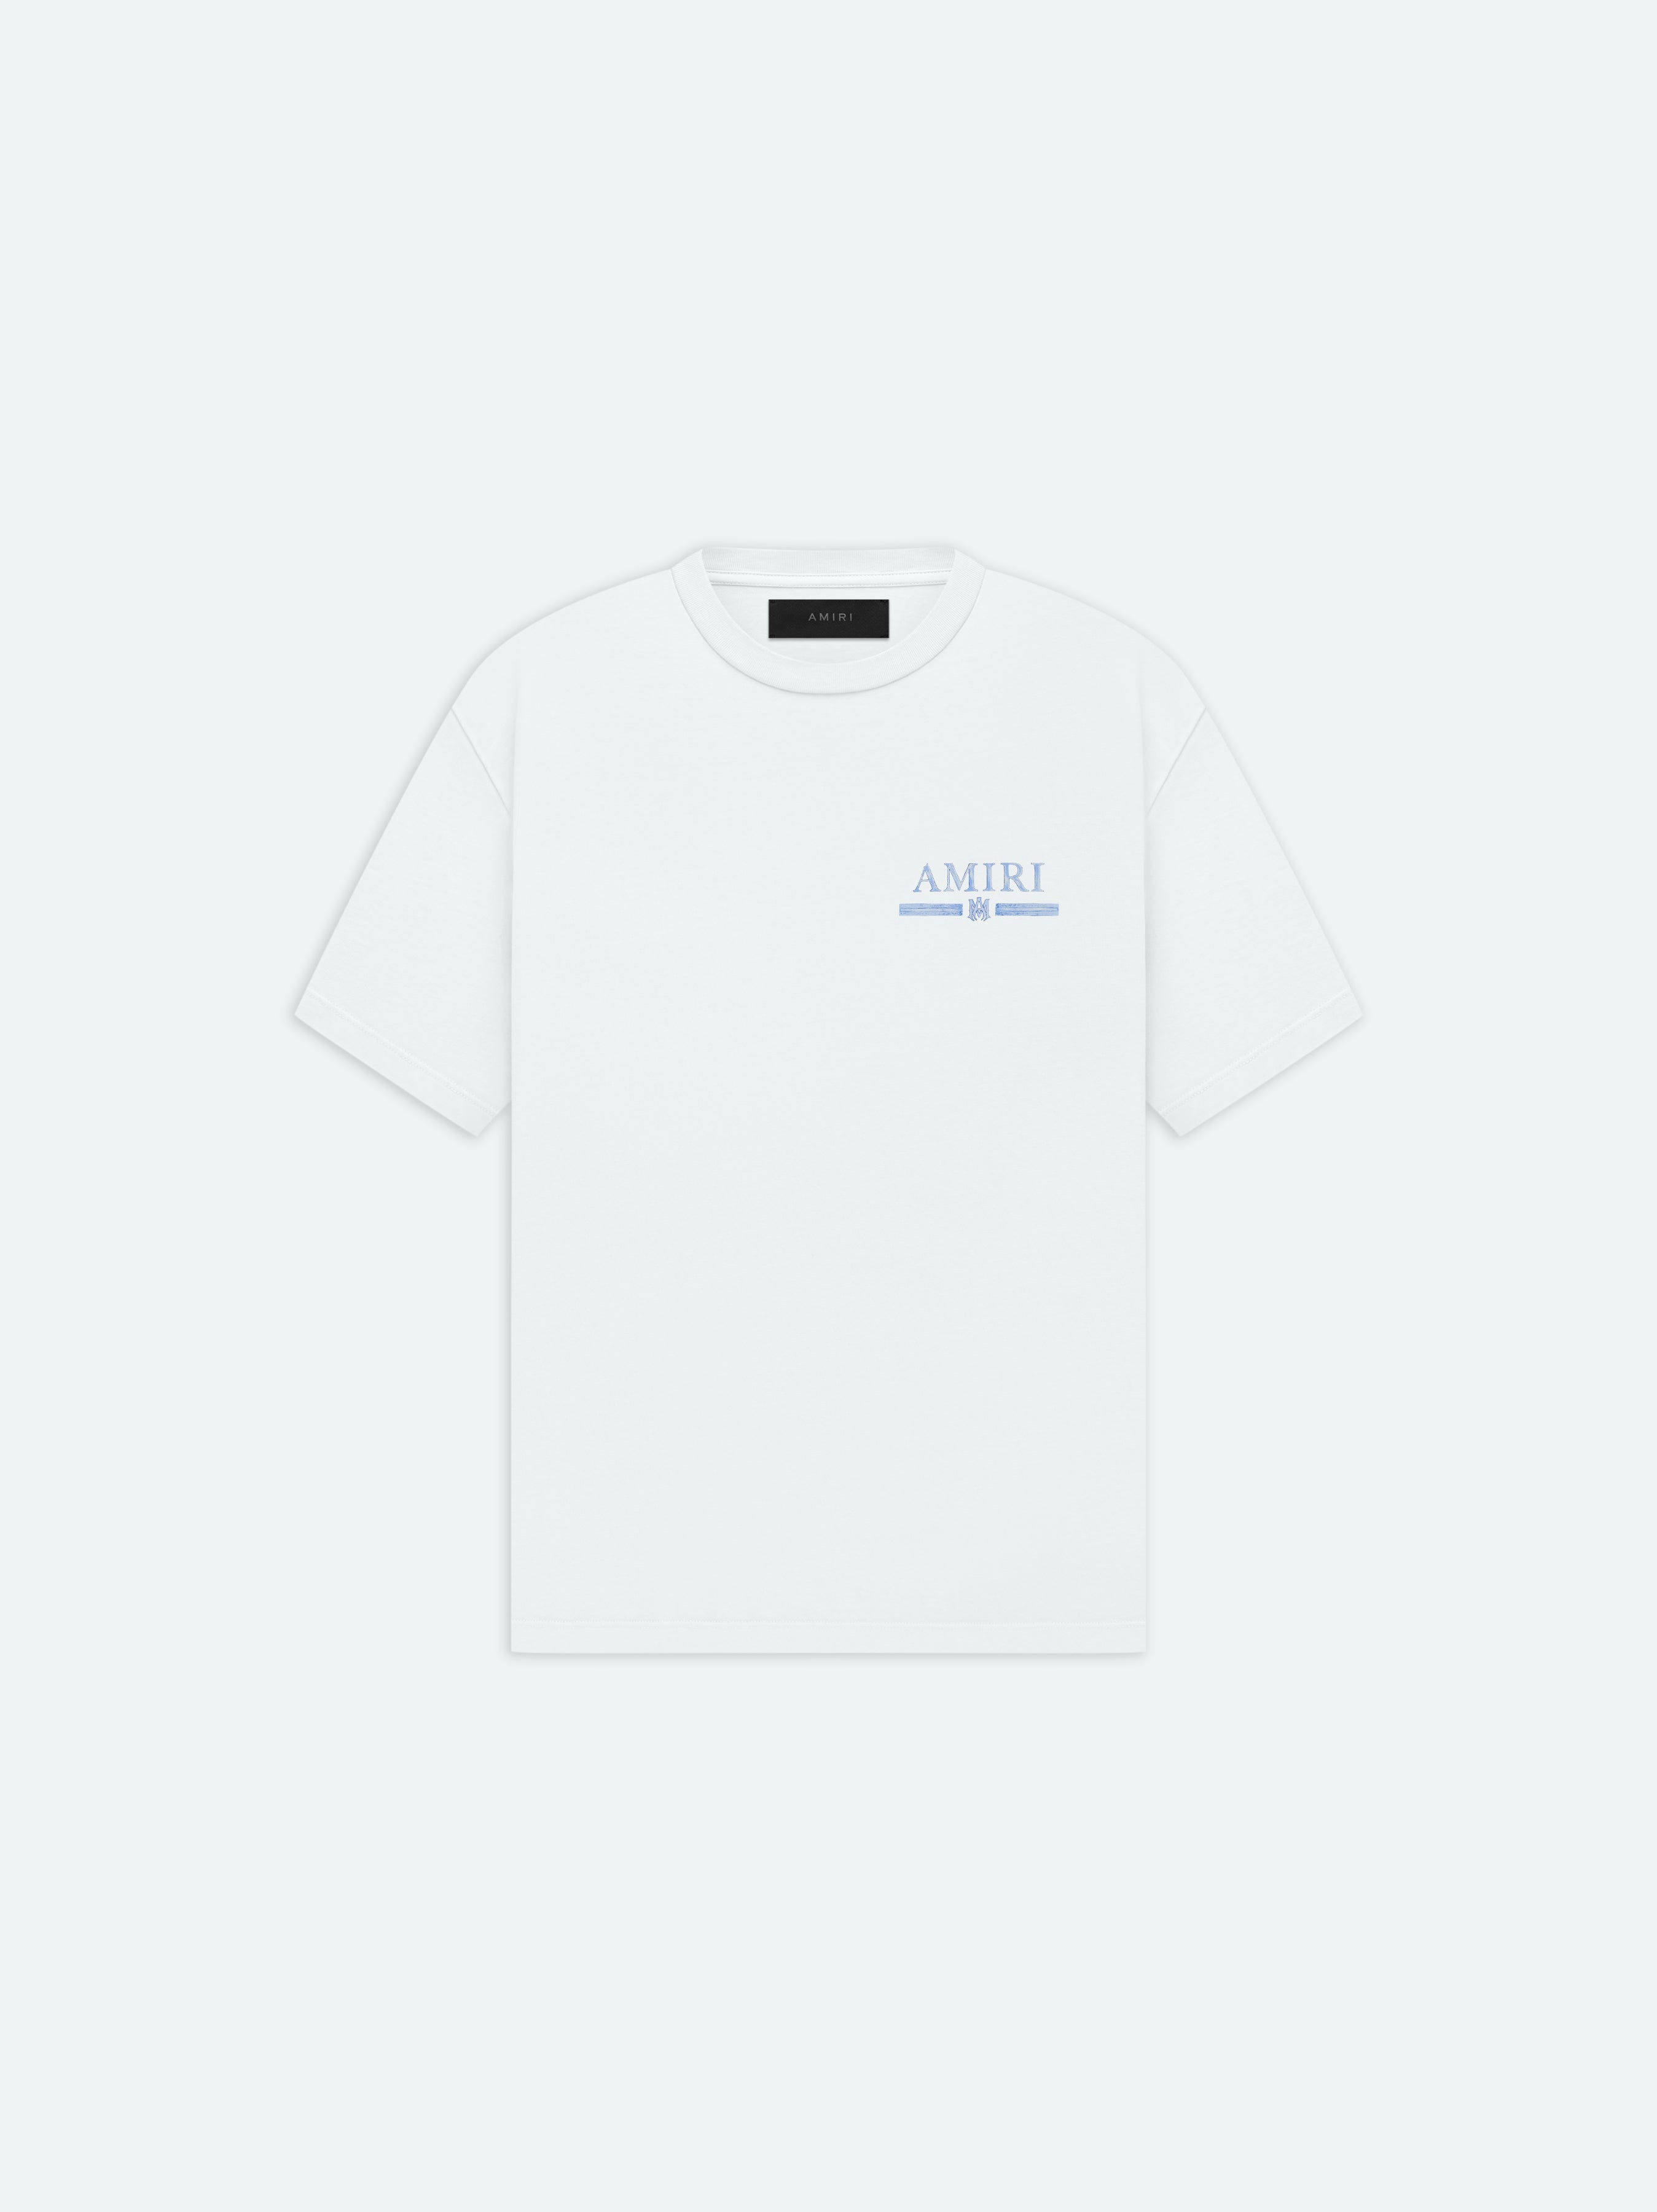 Product MA WATERCOLOR BAR TEE - White featured image